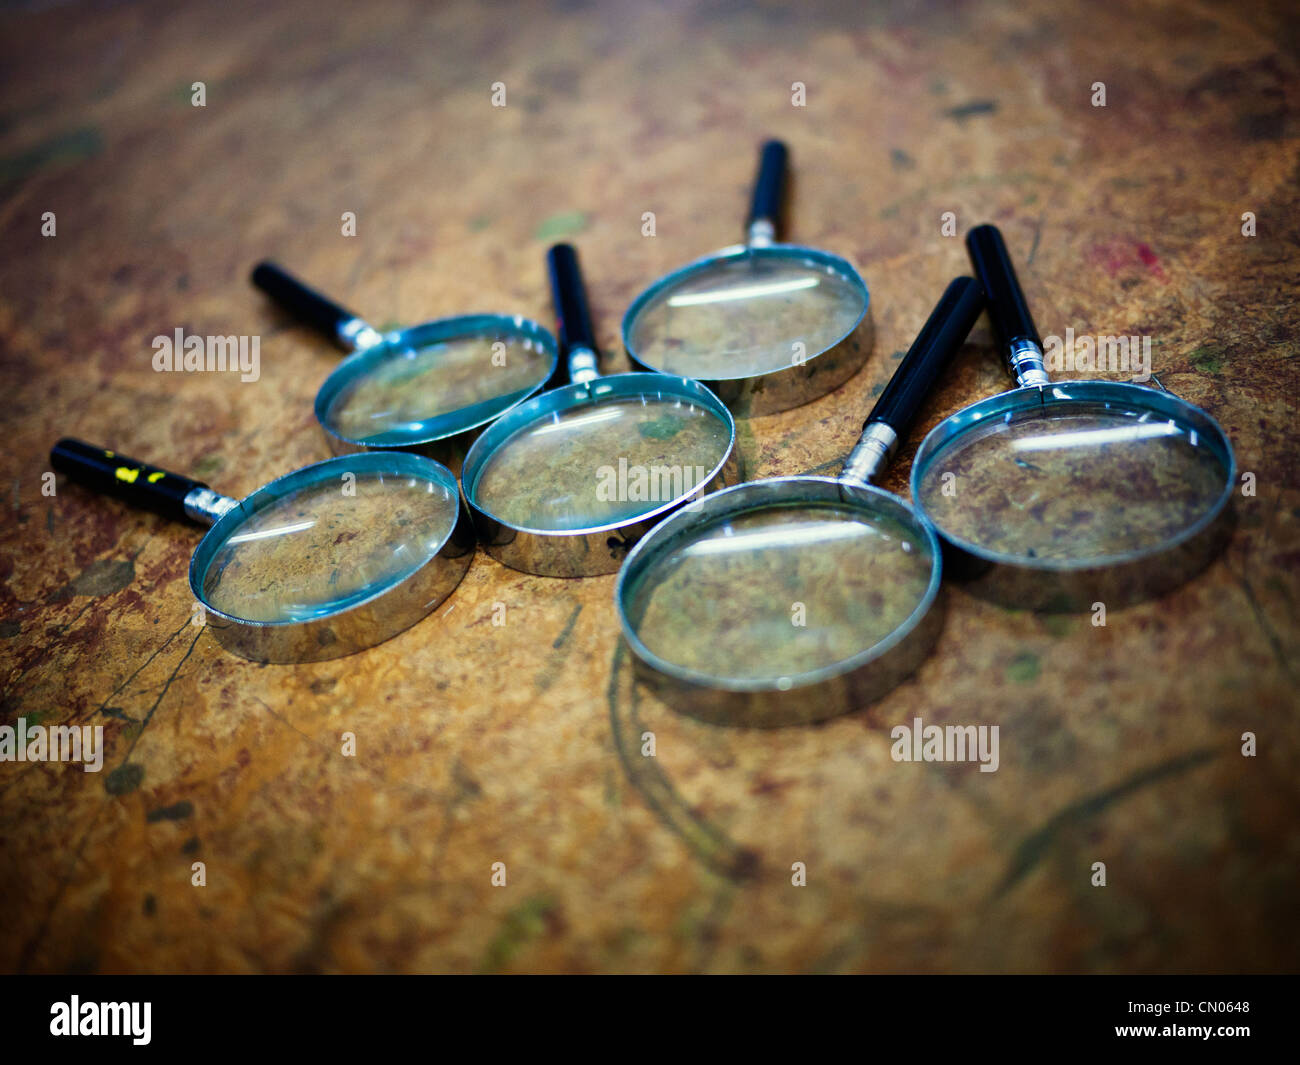 Magnifying glass Stock Photo